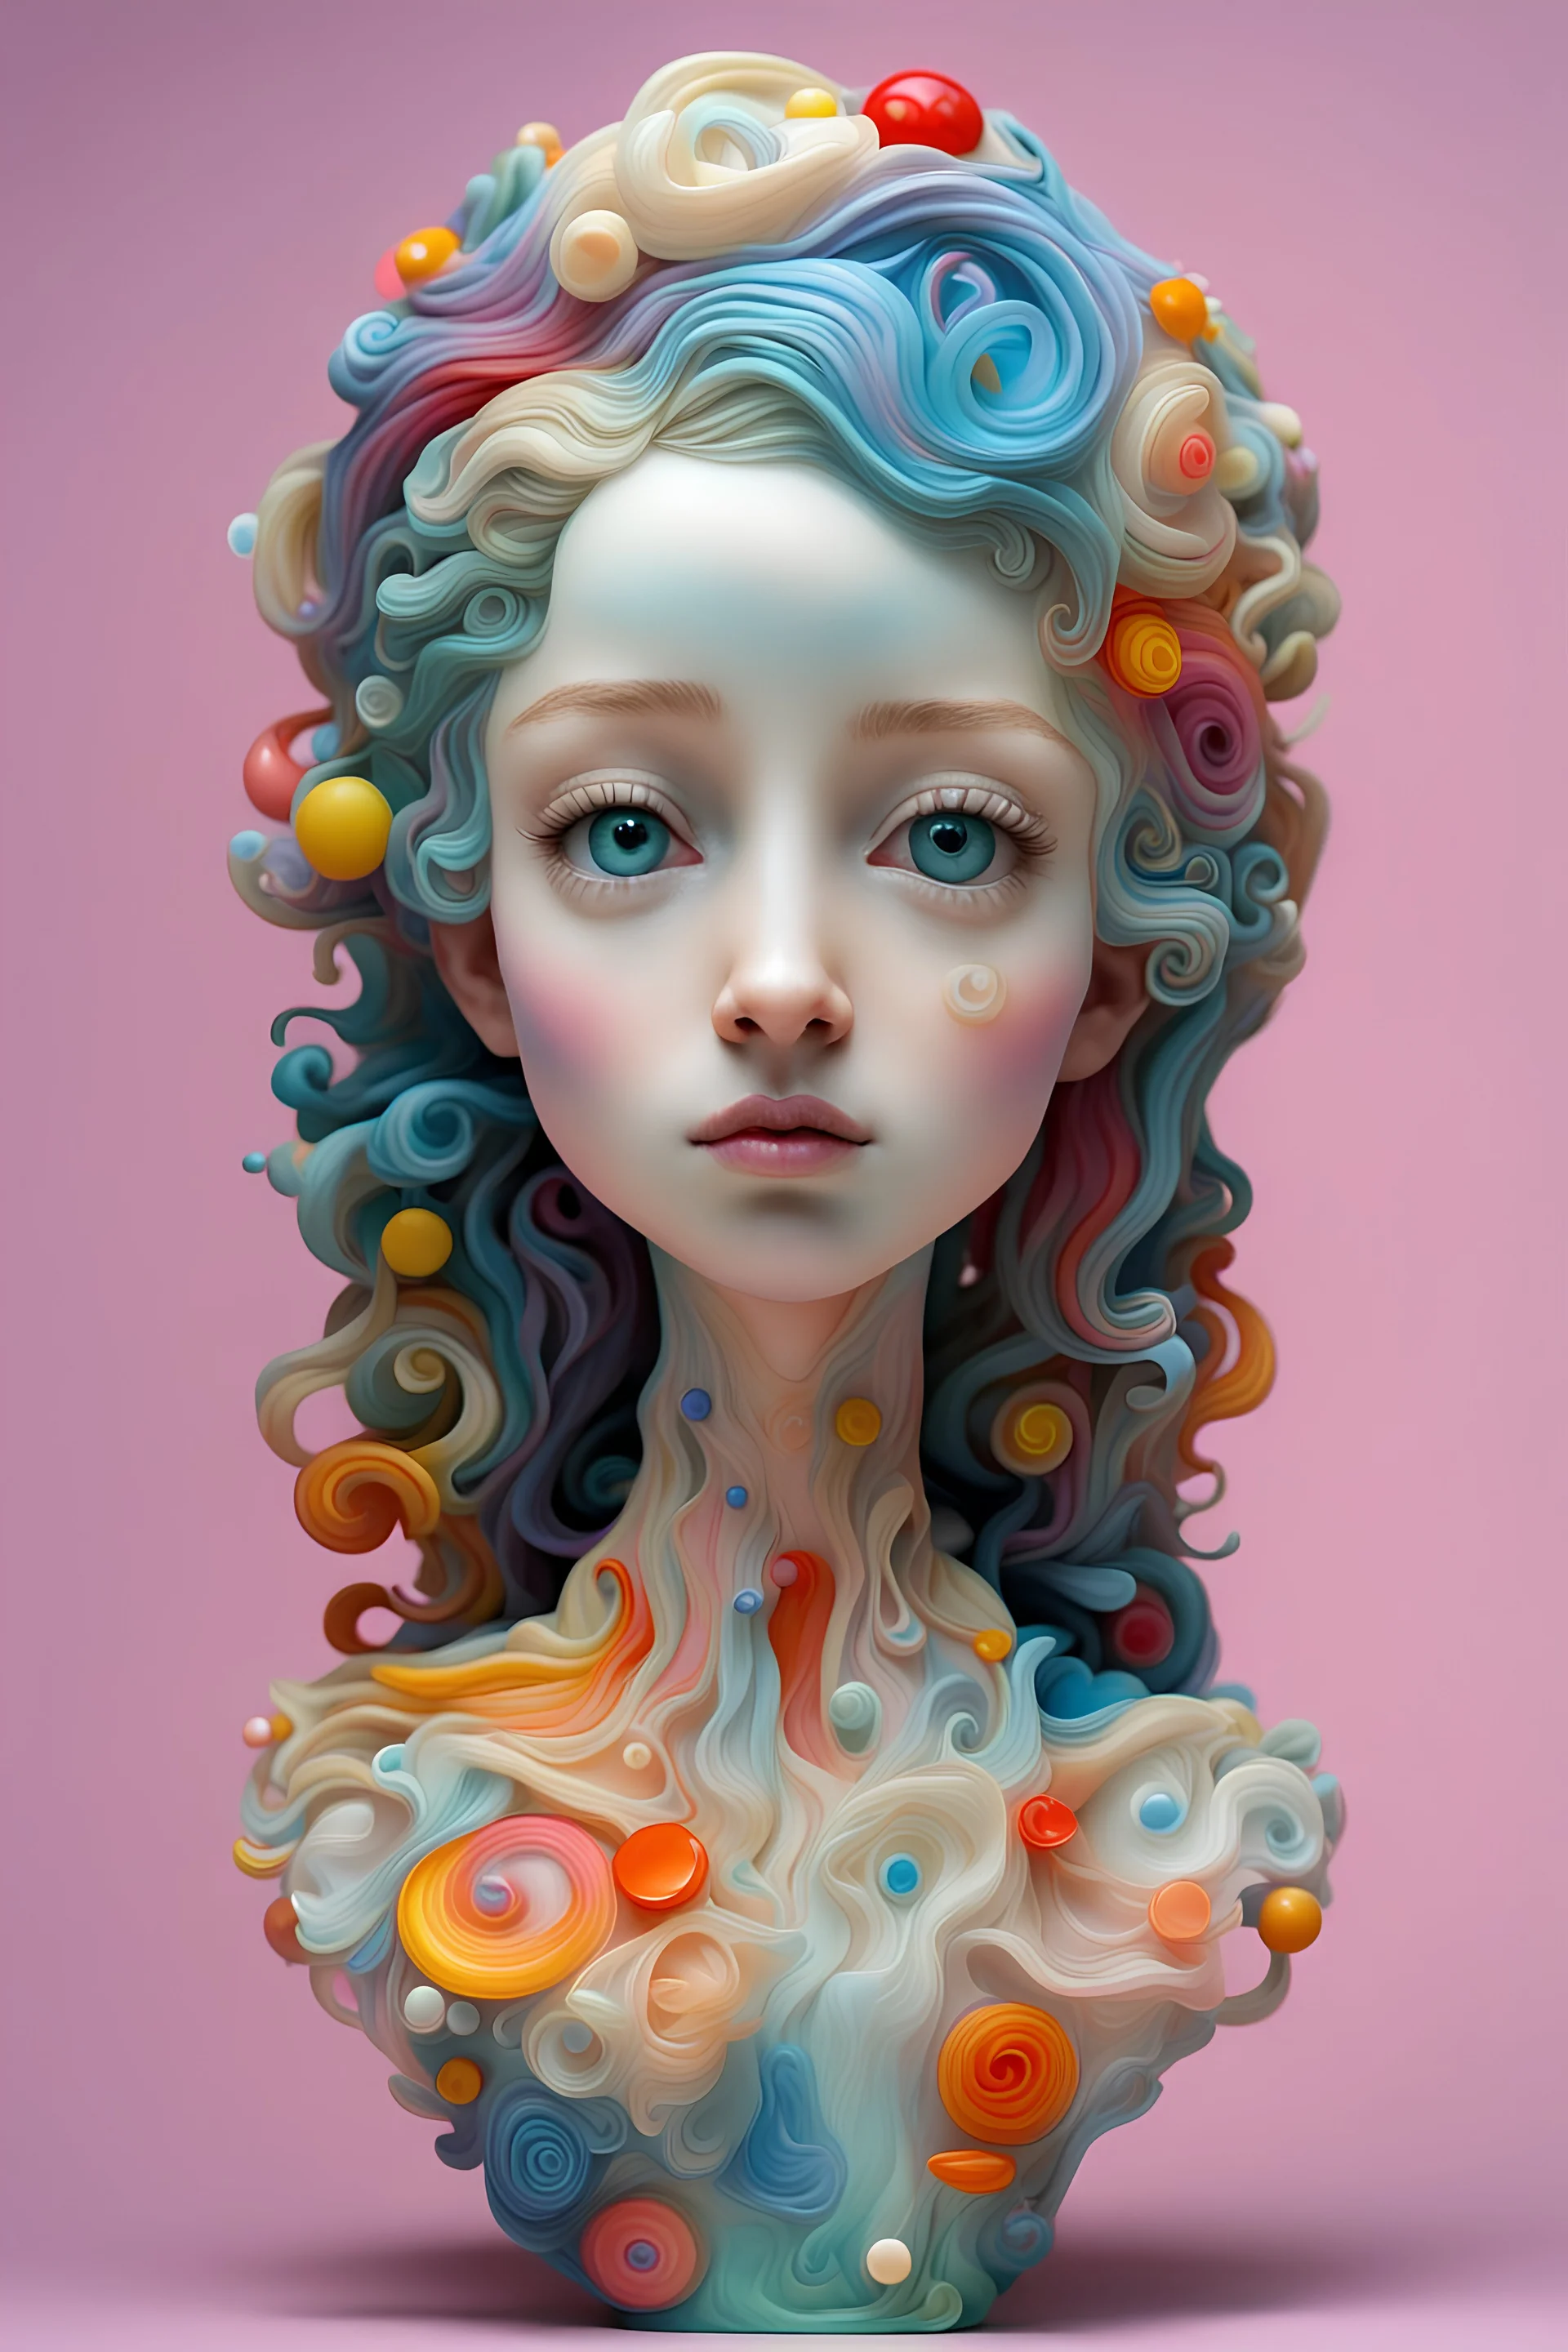 portrait of girl, 3D resin, Skin made from colorful whimsical elements